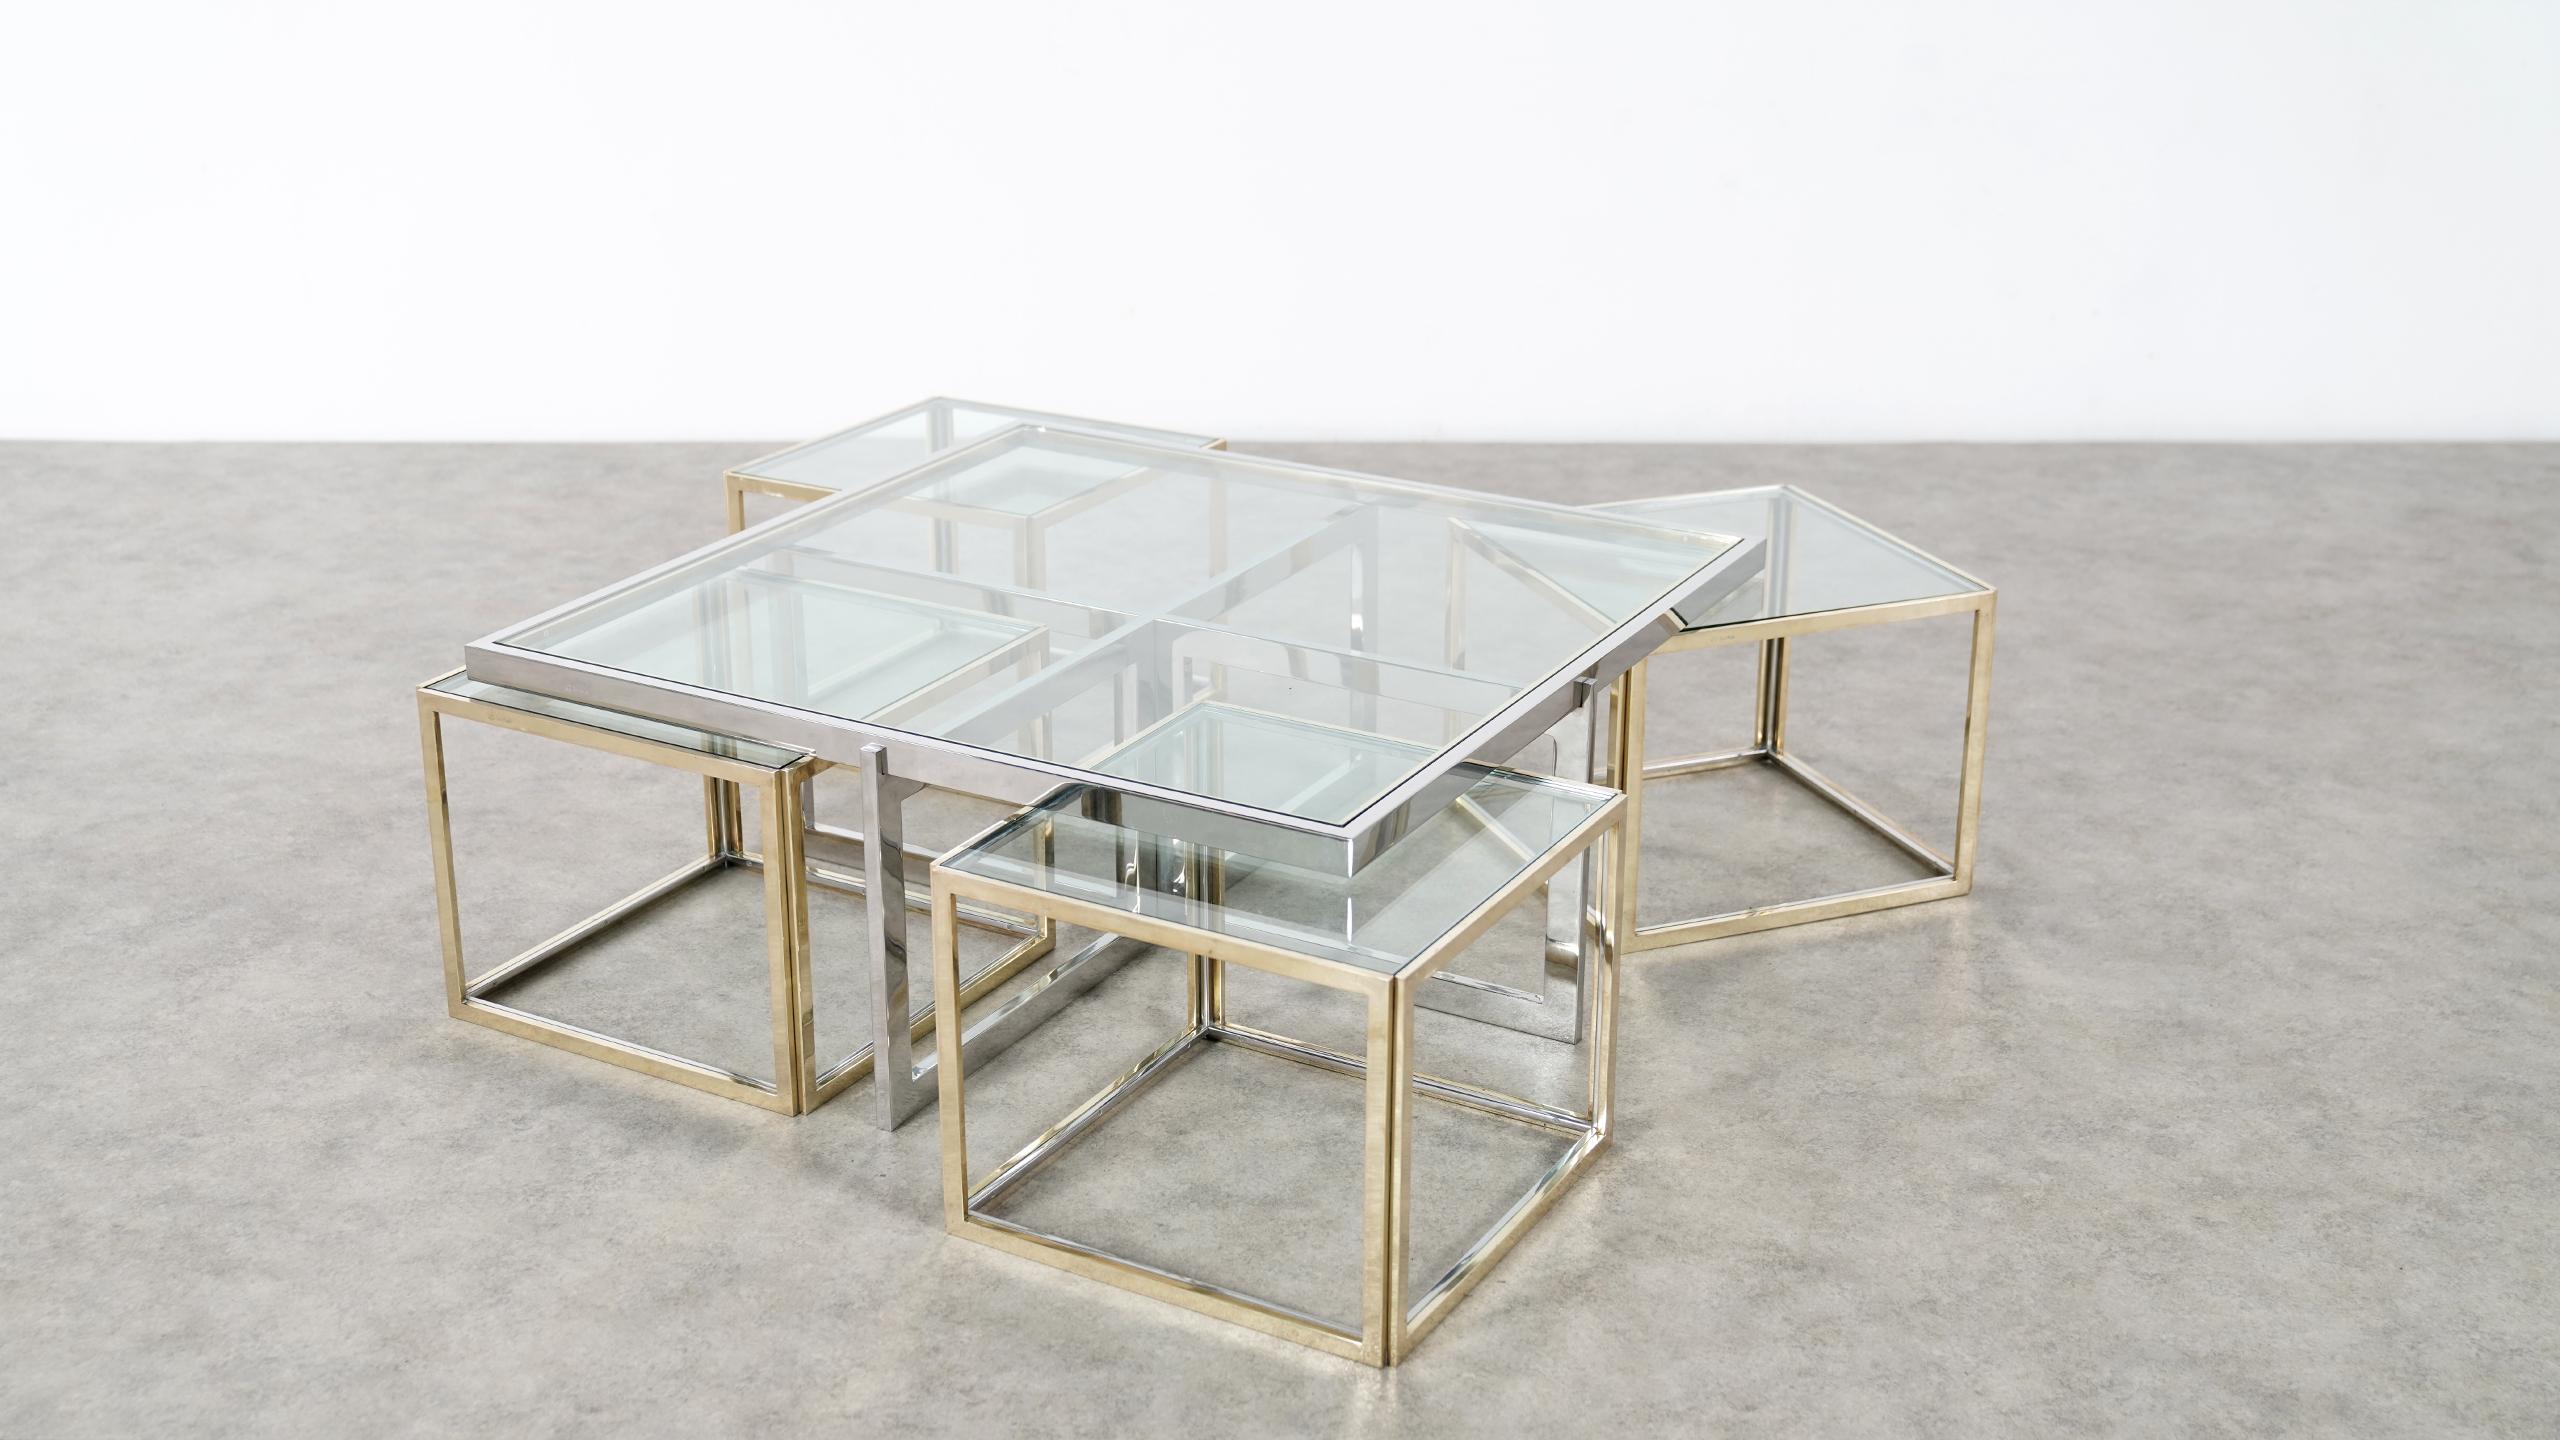 Elegant chrome and glass coffee table with four nesting tables in brass and chrome, designed by Jean Charles, made by Maison Charles. 
This set is extremely rare, as every table is signed & stamped Jean Charles on one side...!!

The tables are in